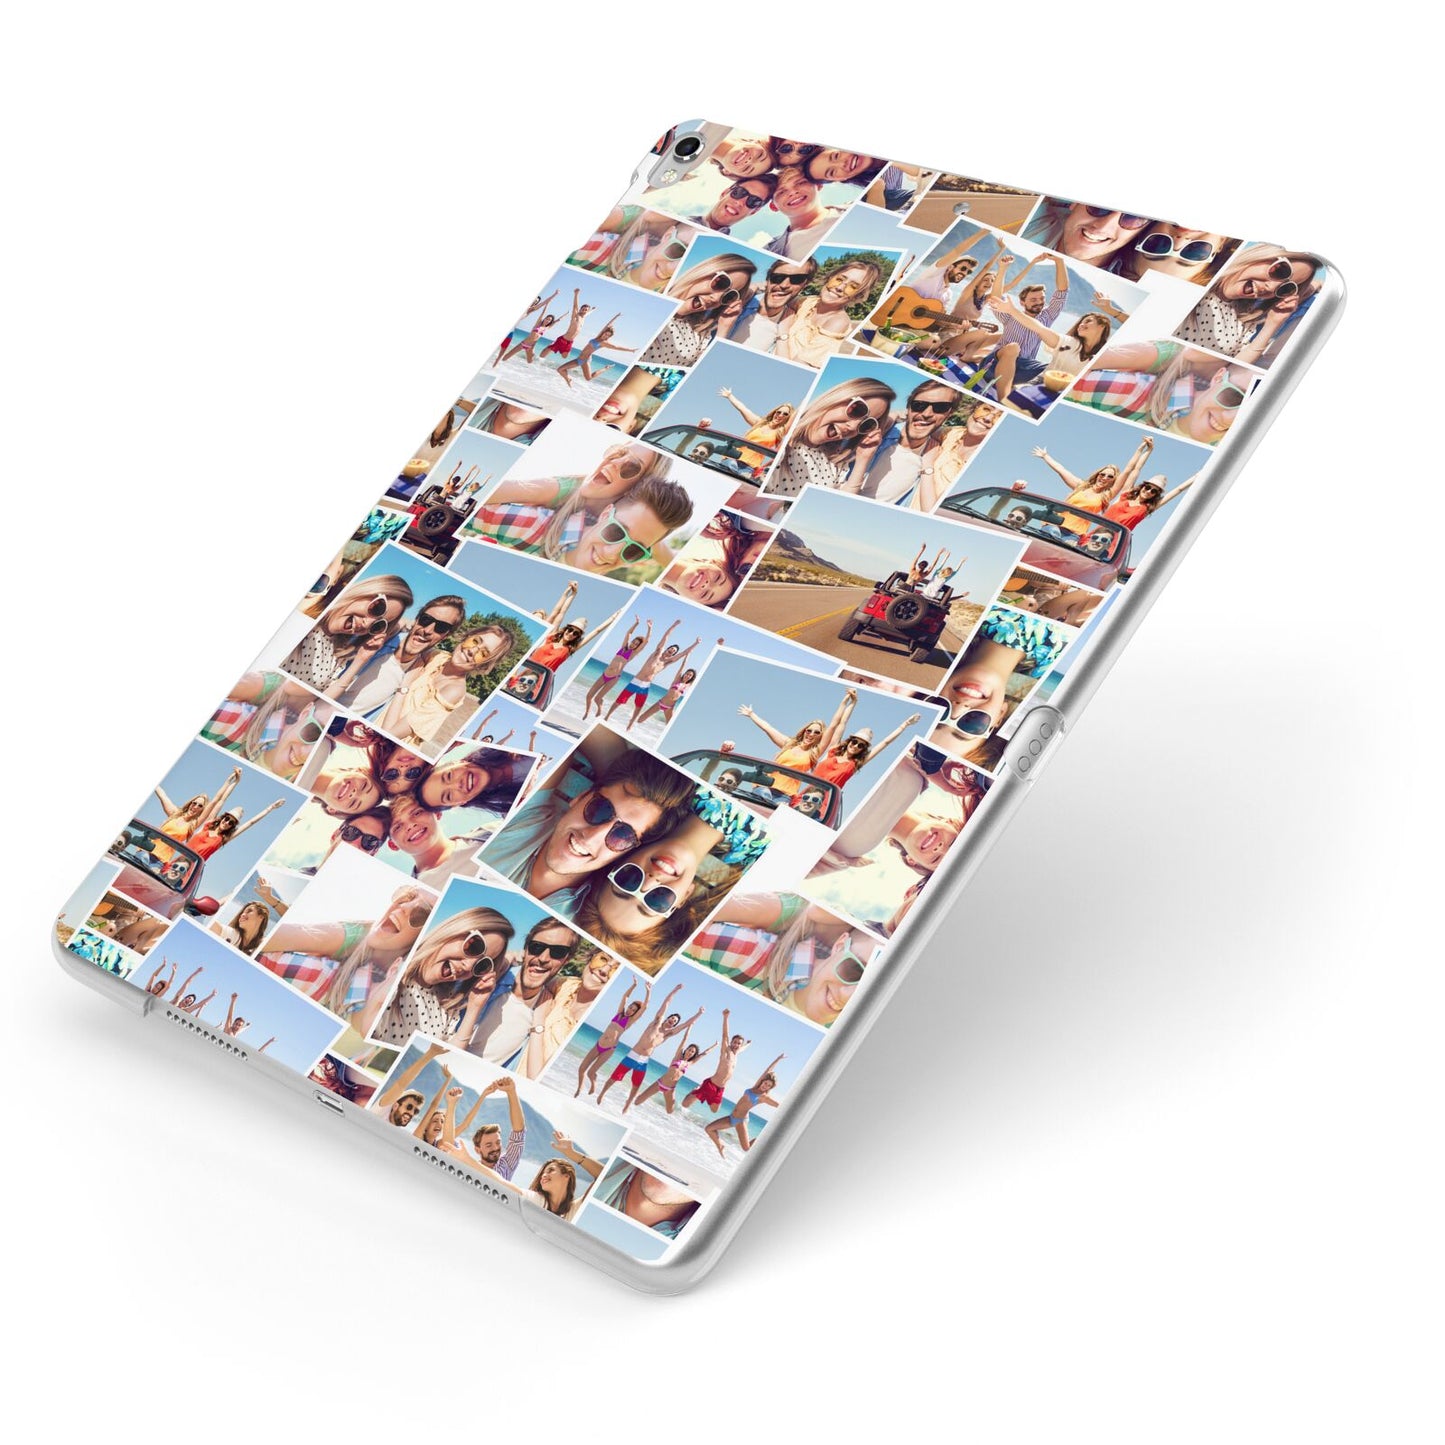 Photo Montage Apple iPad Case on Silver iPad Side View